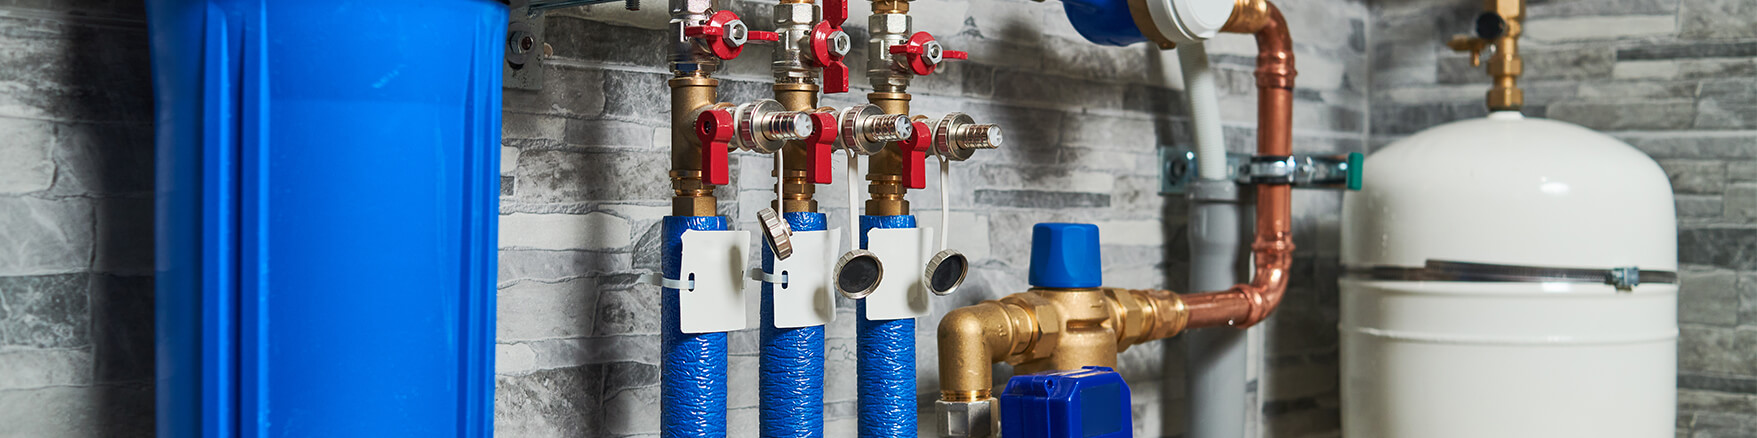 Southbridge Plumbing Company, Plumbing Services and Water Heater Installation